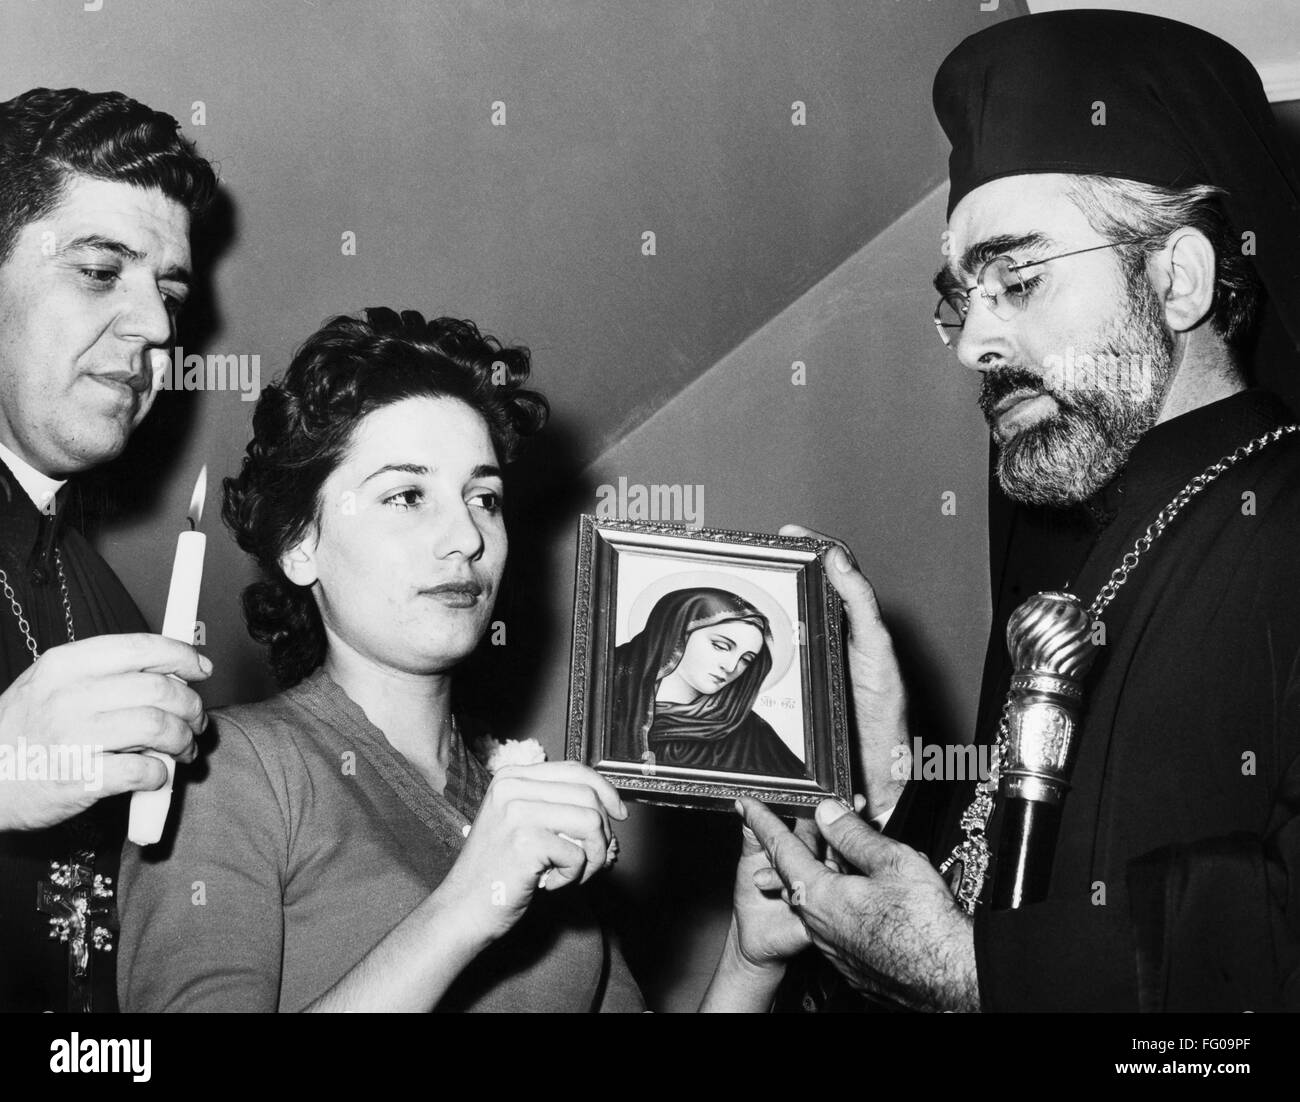 ARCHBISHOP IAKOVOS /n(1911-2005). Born Demetrios Koukouzis. Primate of the Greek Orthodox Archdiocese of North and South America. Iakovos at the home of Pagora Catsouni of Long Island, New York, examining a picture of the Virgin Mary which she claims shed Stock Photo